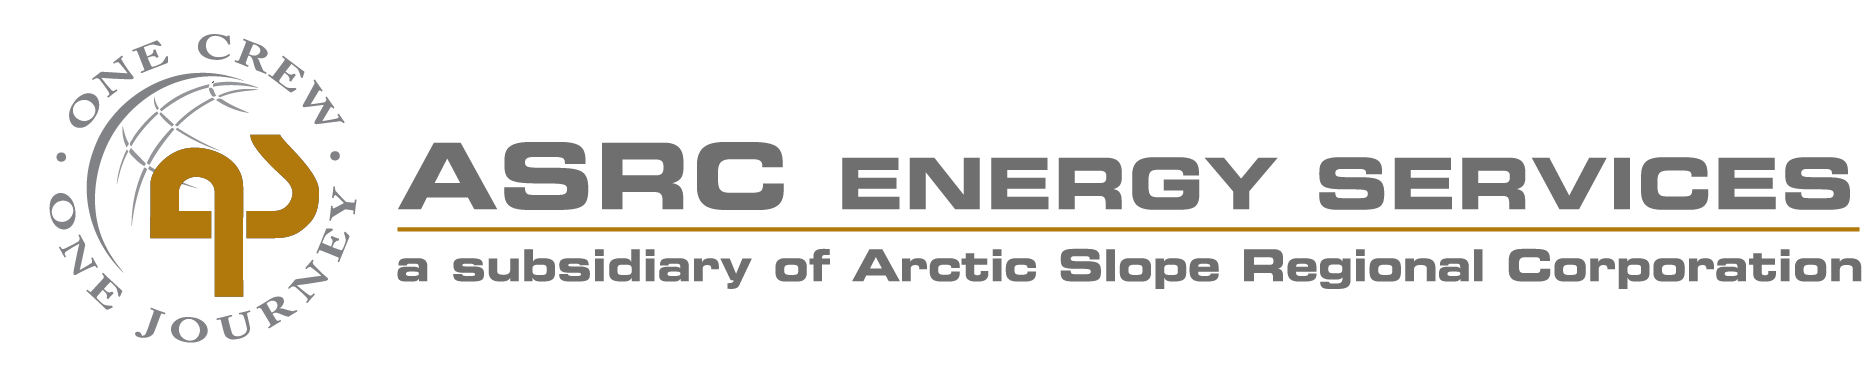 ASRC Energy Services Gray & Gold Font AES Inc Loog-01.png